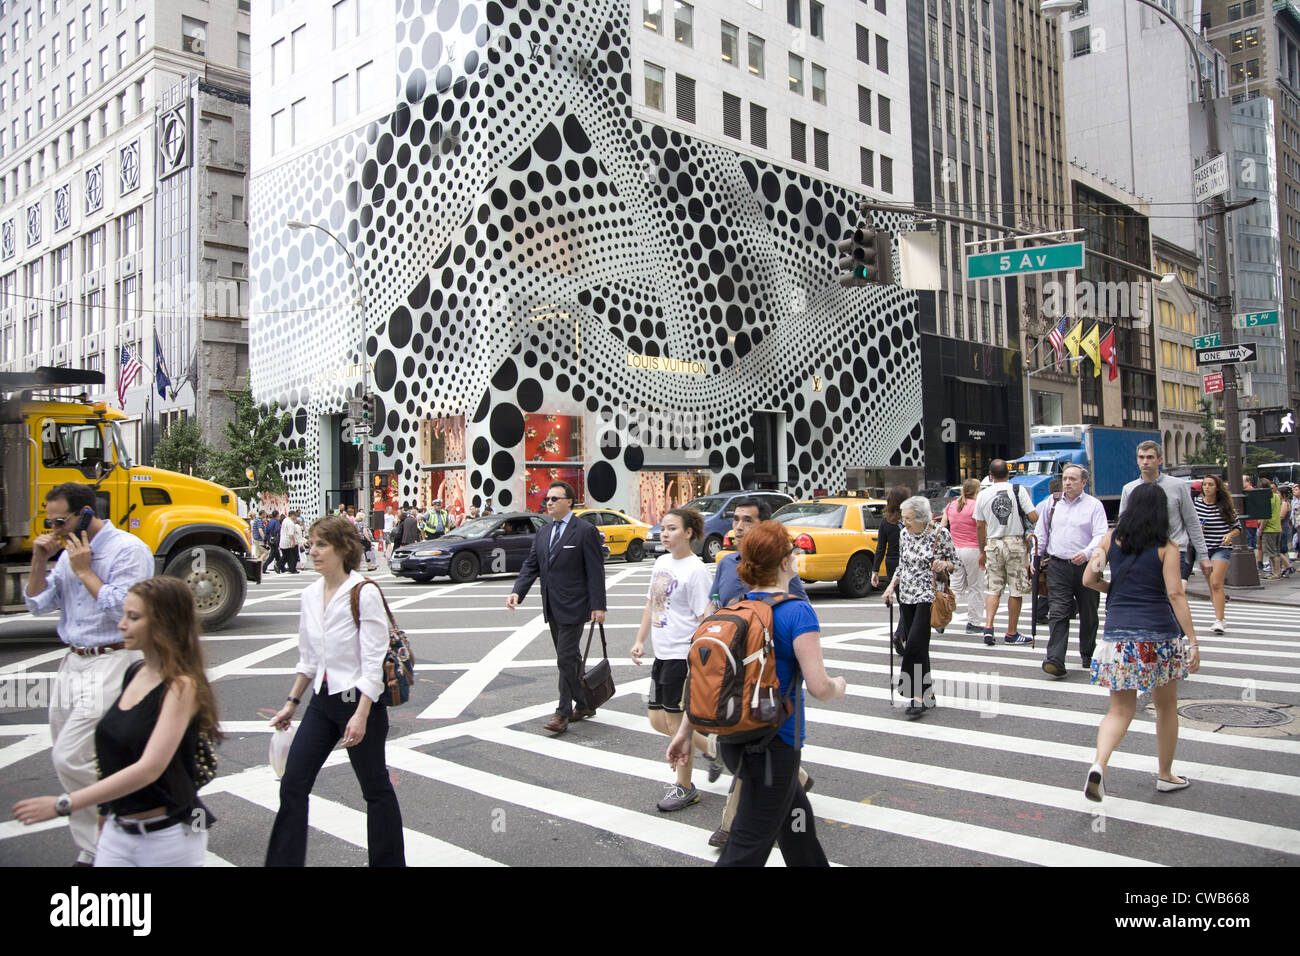 Louis Vuitton 5th Avenue and 57th Street – Visual Merchandising and Store  Design